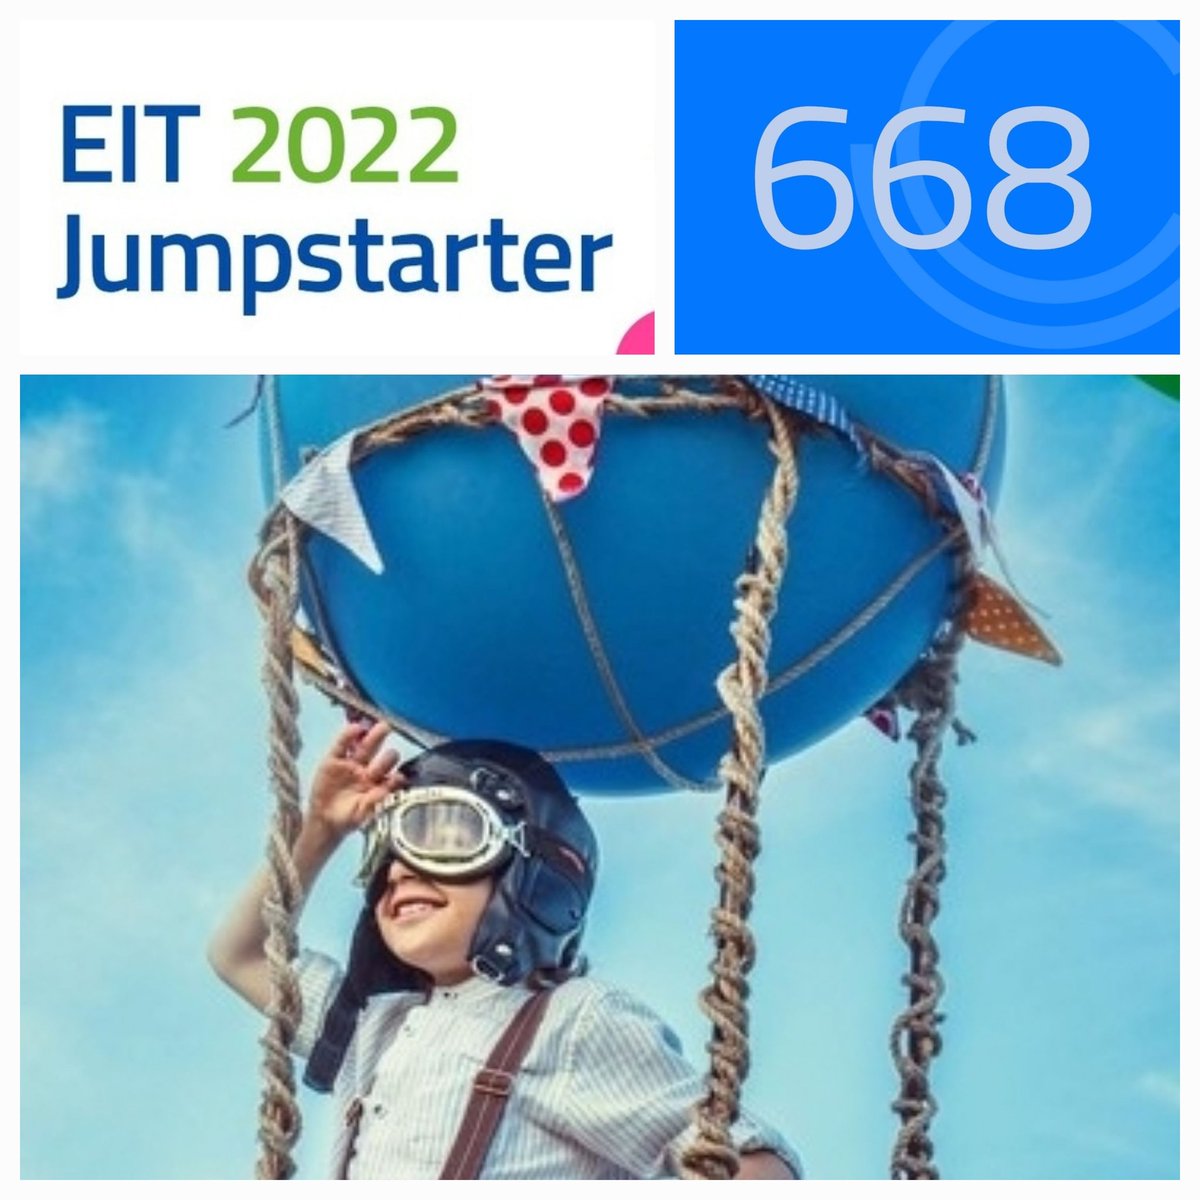 The EIT Jumpstarter finals day has arrived! Fingers crossed for #manufacturing teams @LUMELABEL
Join with us today at 13.00 CET. Online, get your access: eitjumpstarter.eu
@JoannaOrtyl @EITManufactur @EITeu 
#EITJumpstarter